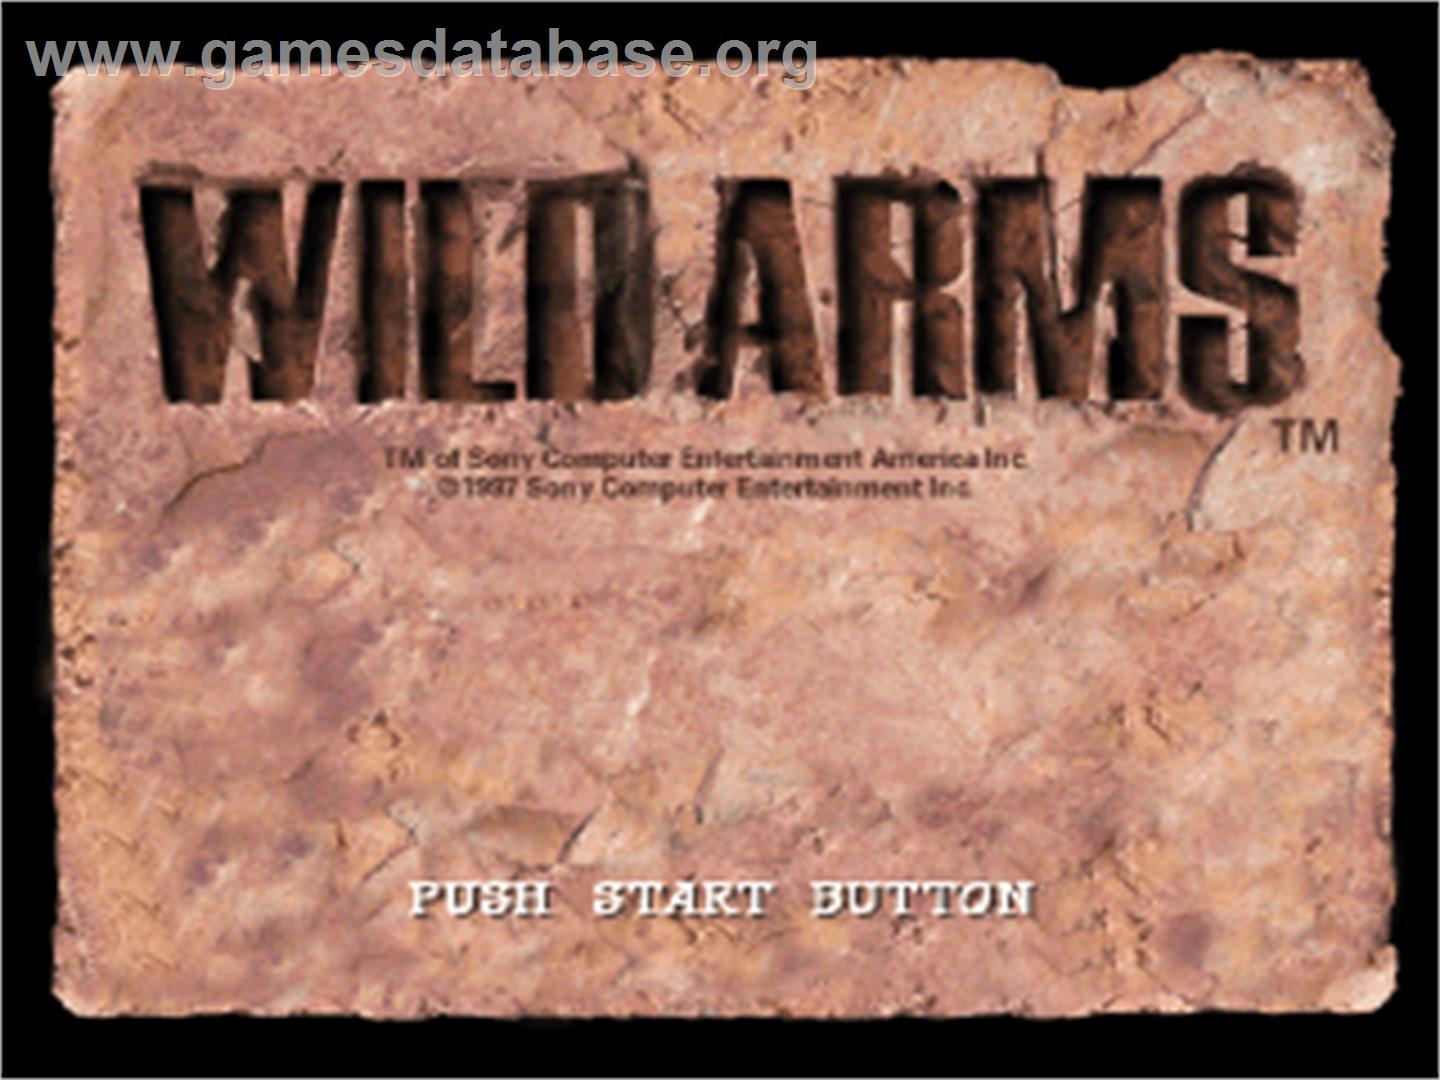 Wild Arms - Sony Playstation - Artwork - Title Screen